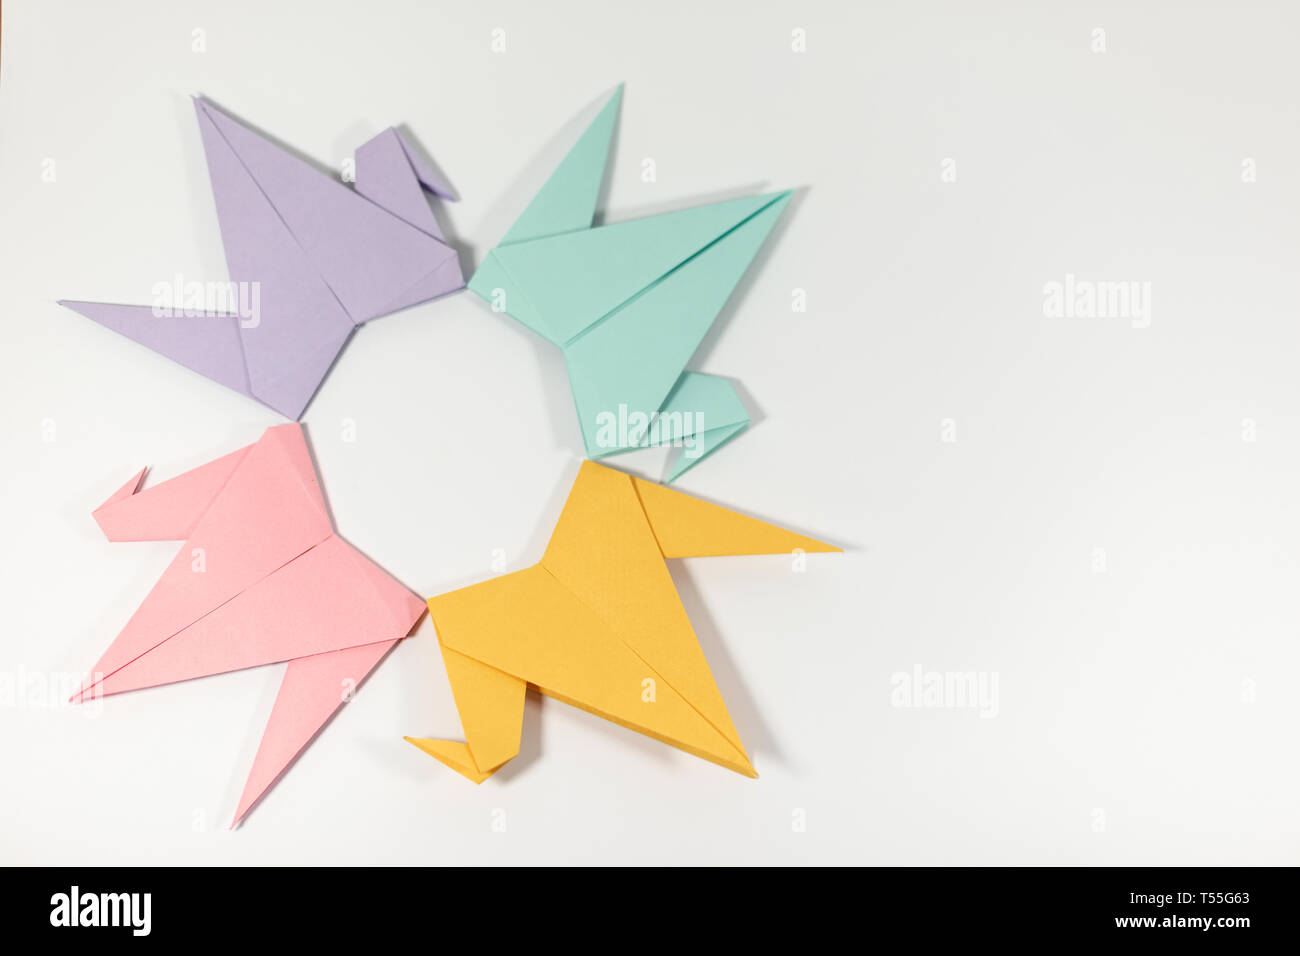 Hand folded pastel coloured origami paper cranes arranges in a circular pattern isolated on a white background Stock Photo